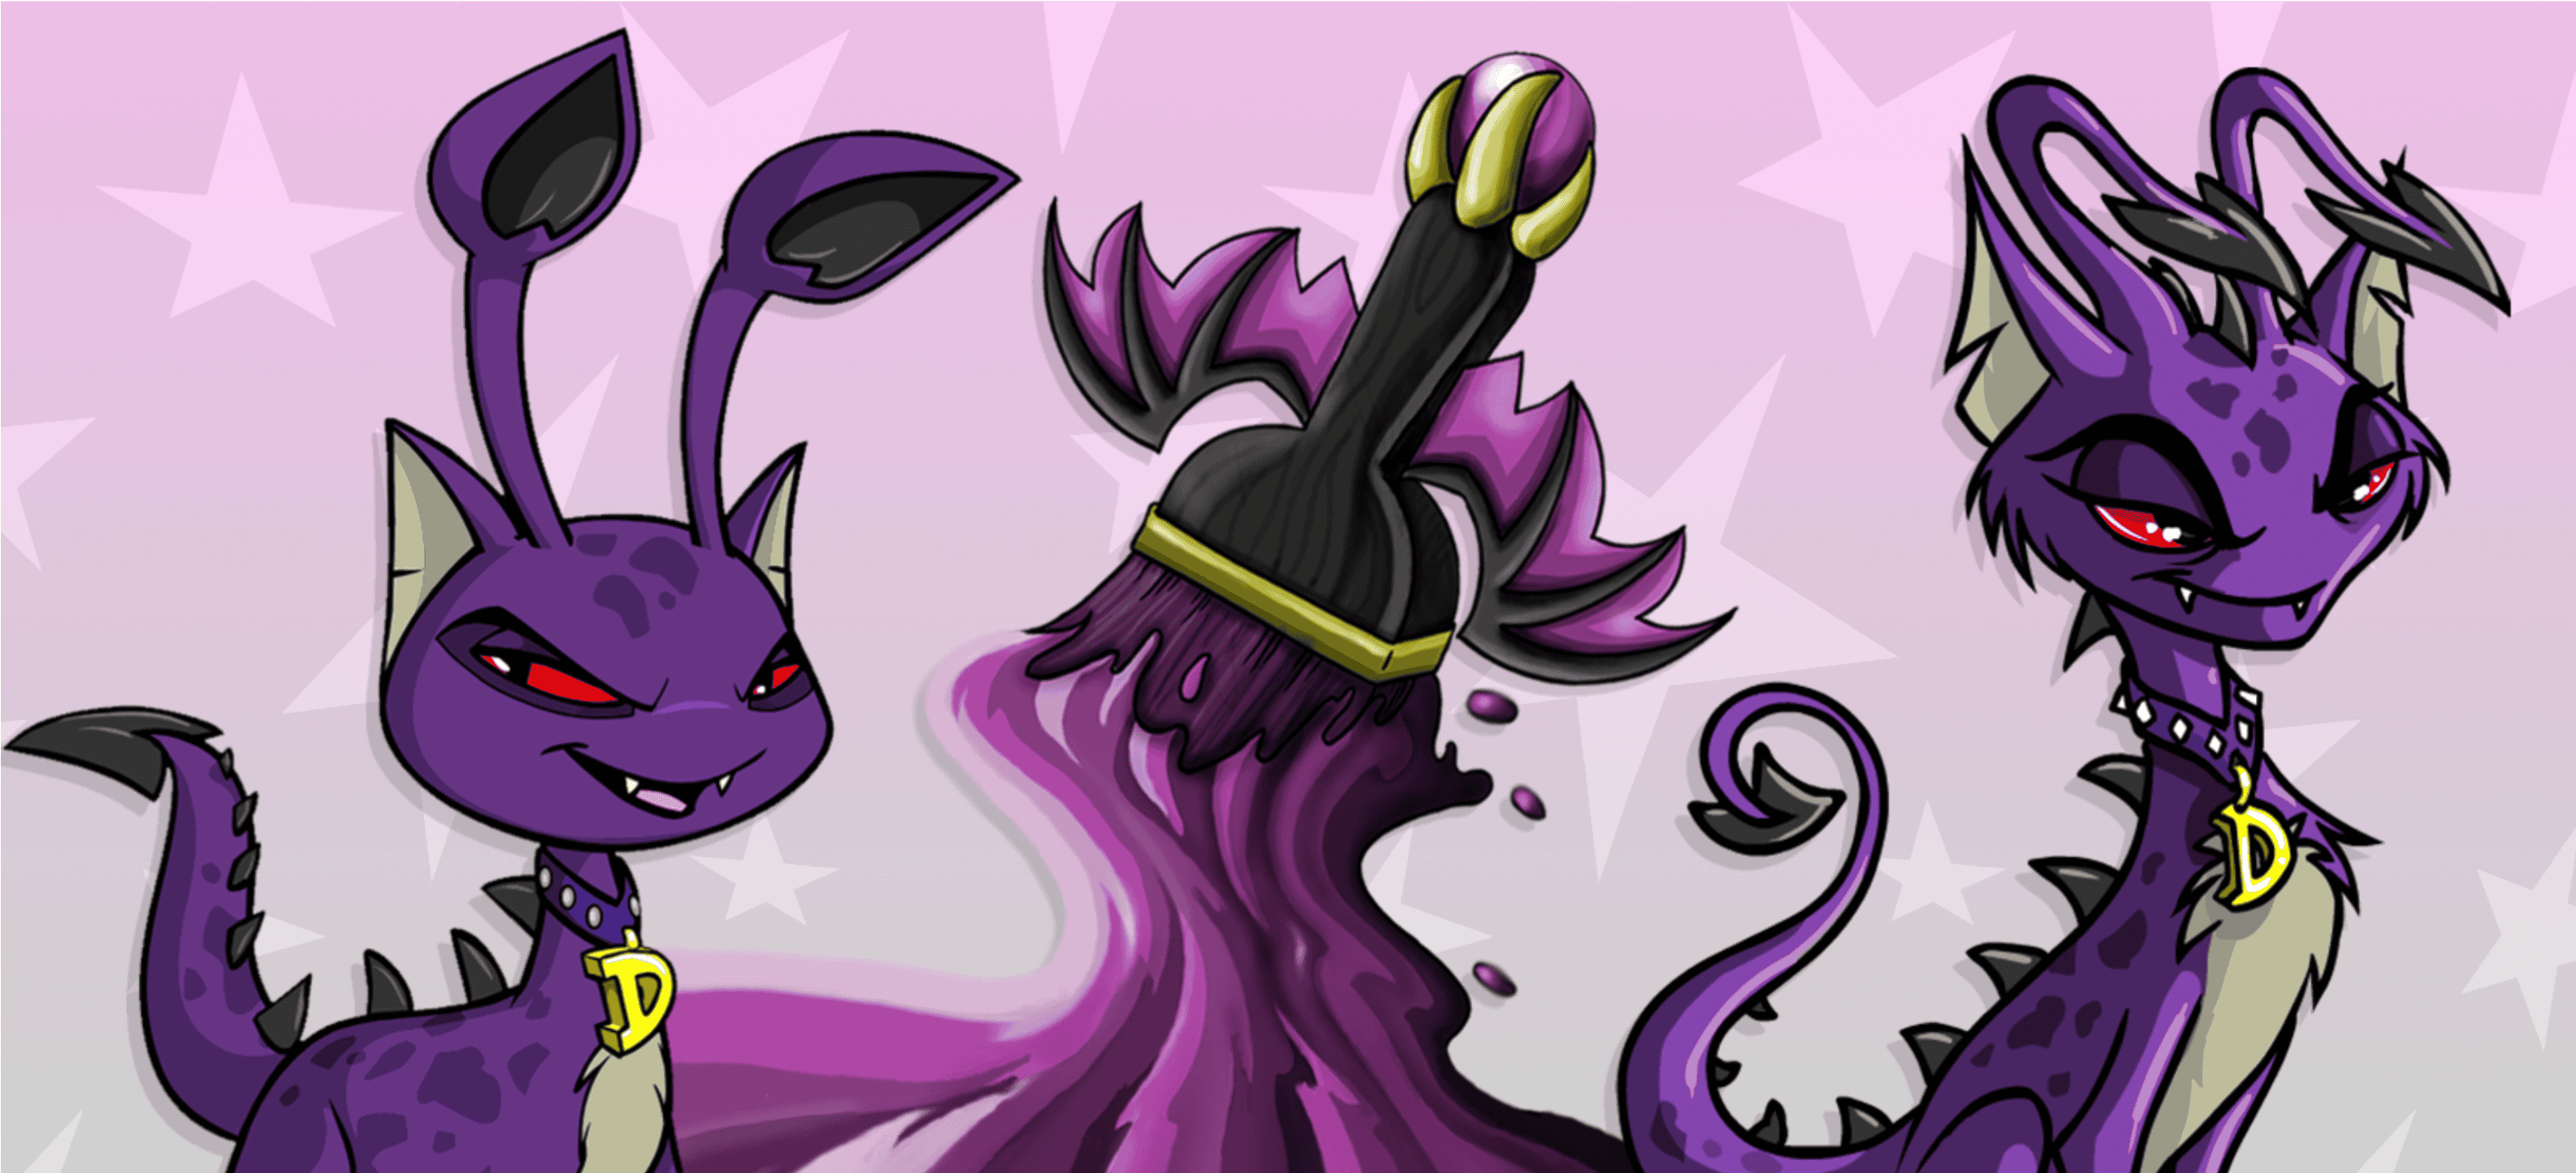 Two Neopets (both Aishas, which look like cats with long ears) on each side of a Darigan paint brush. Each Neopet has the Darigan ‘skin,’ which makes the Neopets purple with red eyes. The Aisha on the left is the current art, while the Aisha on the right has unconverted, pre-2007 original art.